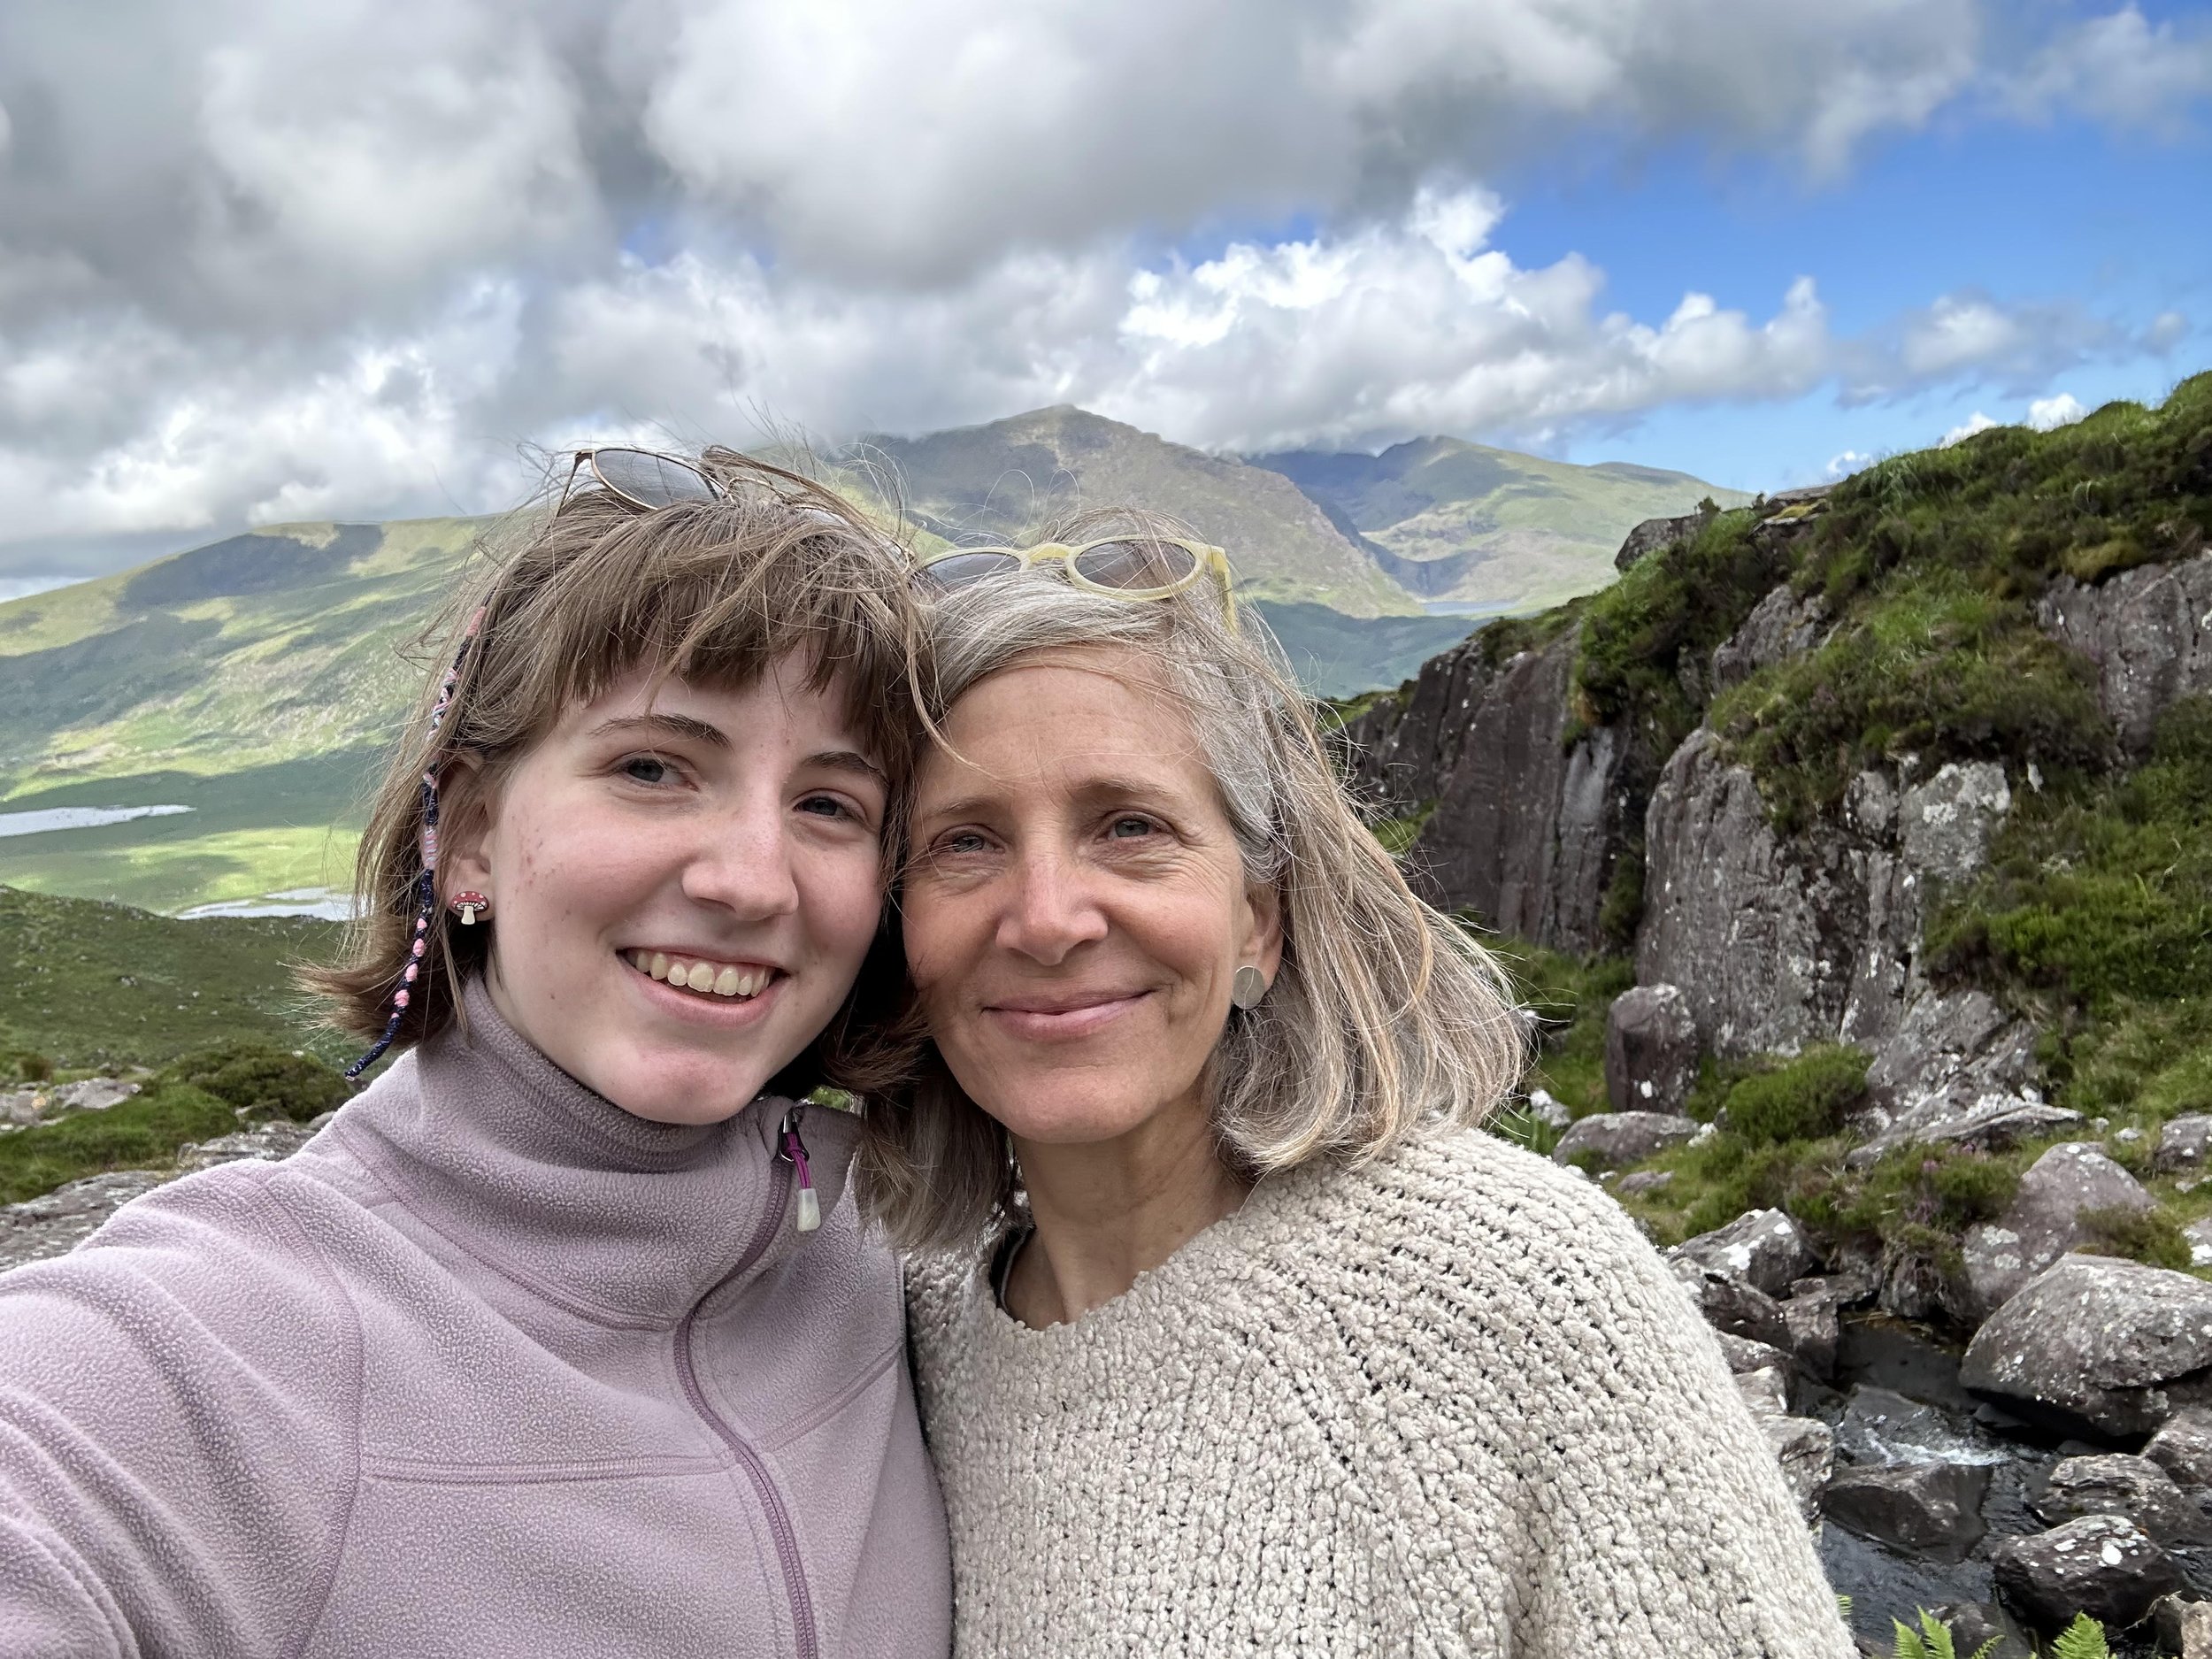  Michele Allen, C2DREAM MPI, traveled to Ireland for the International Collaboration for Participatory Health Research national meetings and brought her oldest child, Harper to&nbsp;celebrate their high school graduation. This photo is from the top o